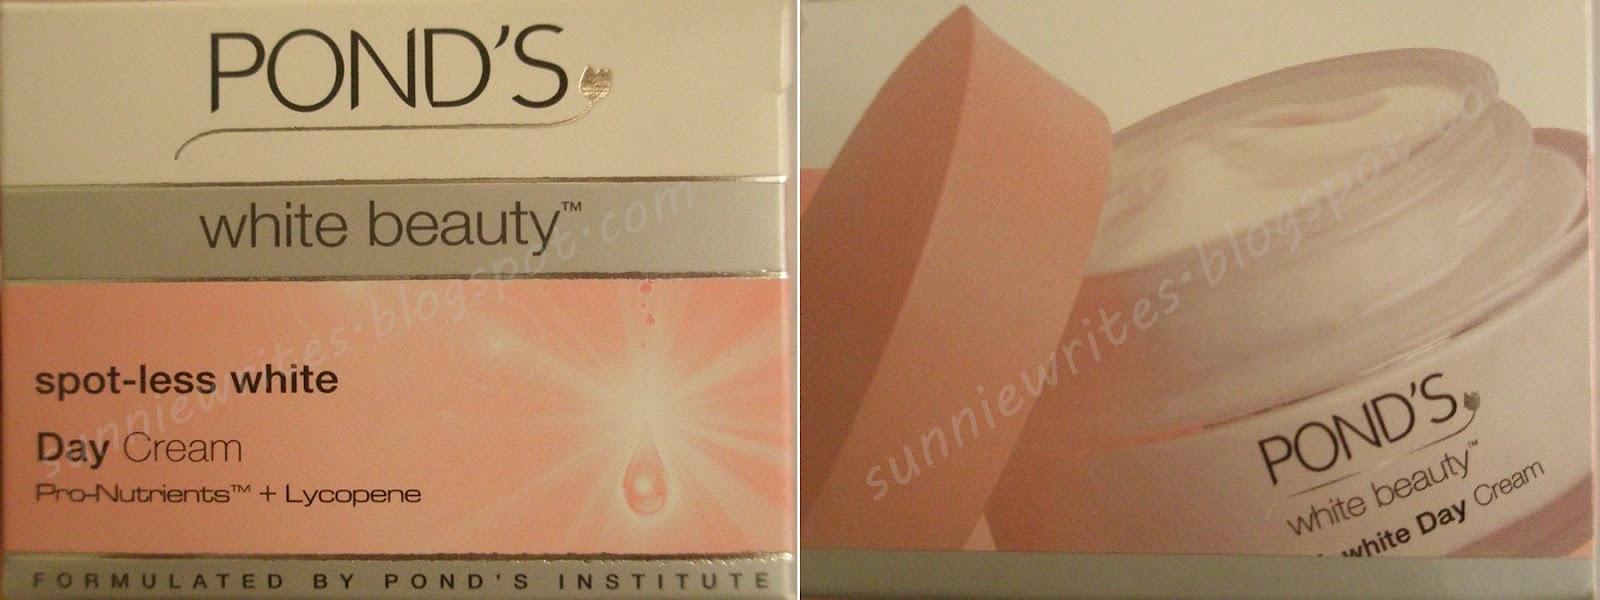 Review [Ponds White Beauty Spot-Less White Day Cream]